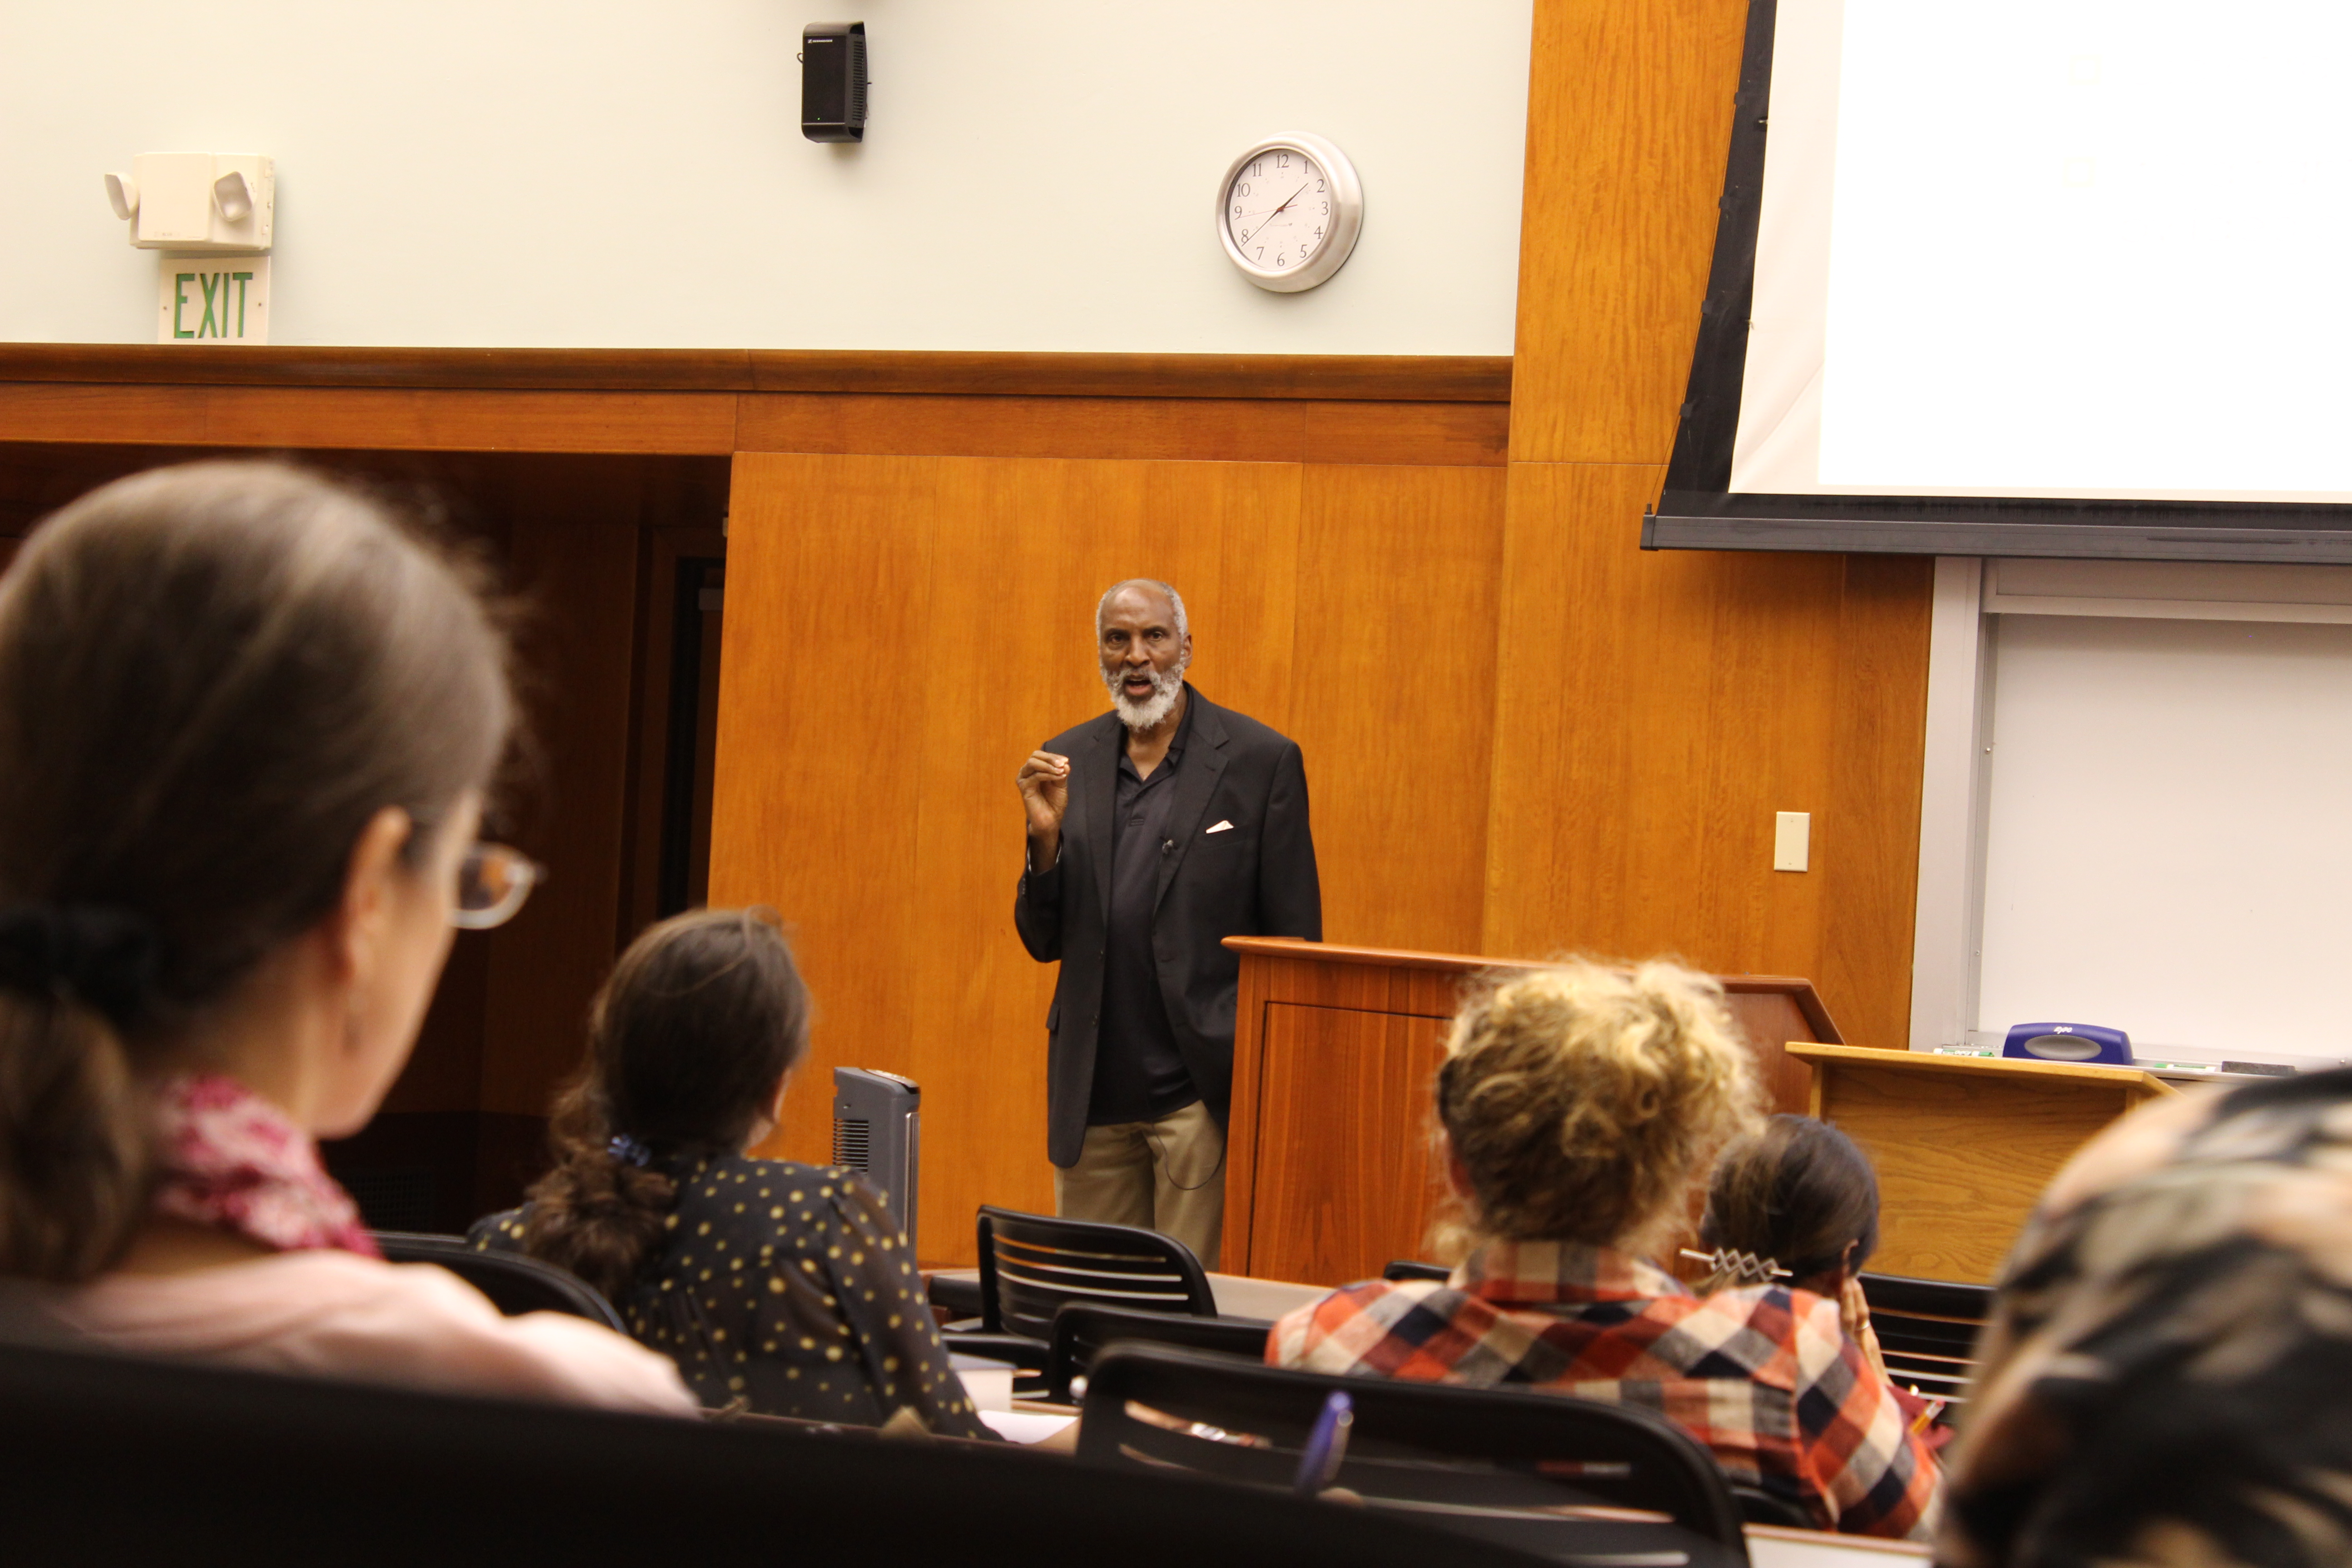 Professor john a. powell lectures at Boalt Hall for Thelton E. Henderson Center for Social Justice lecture series.